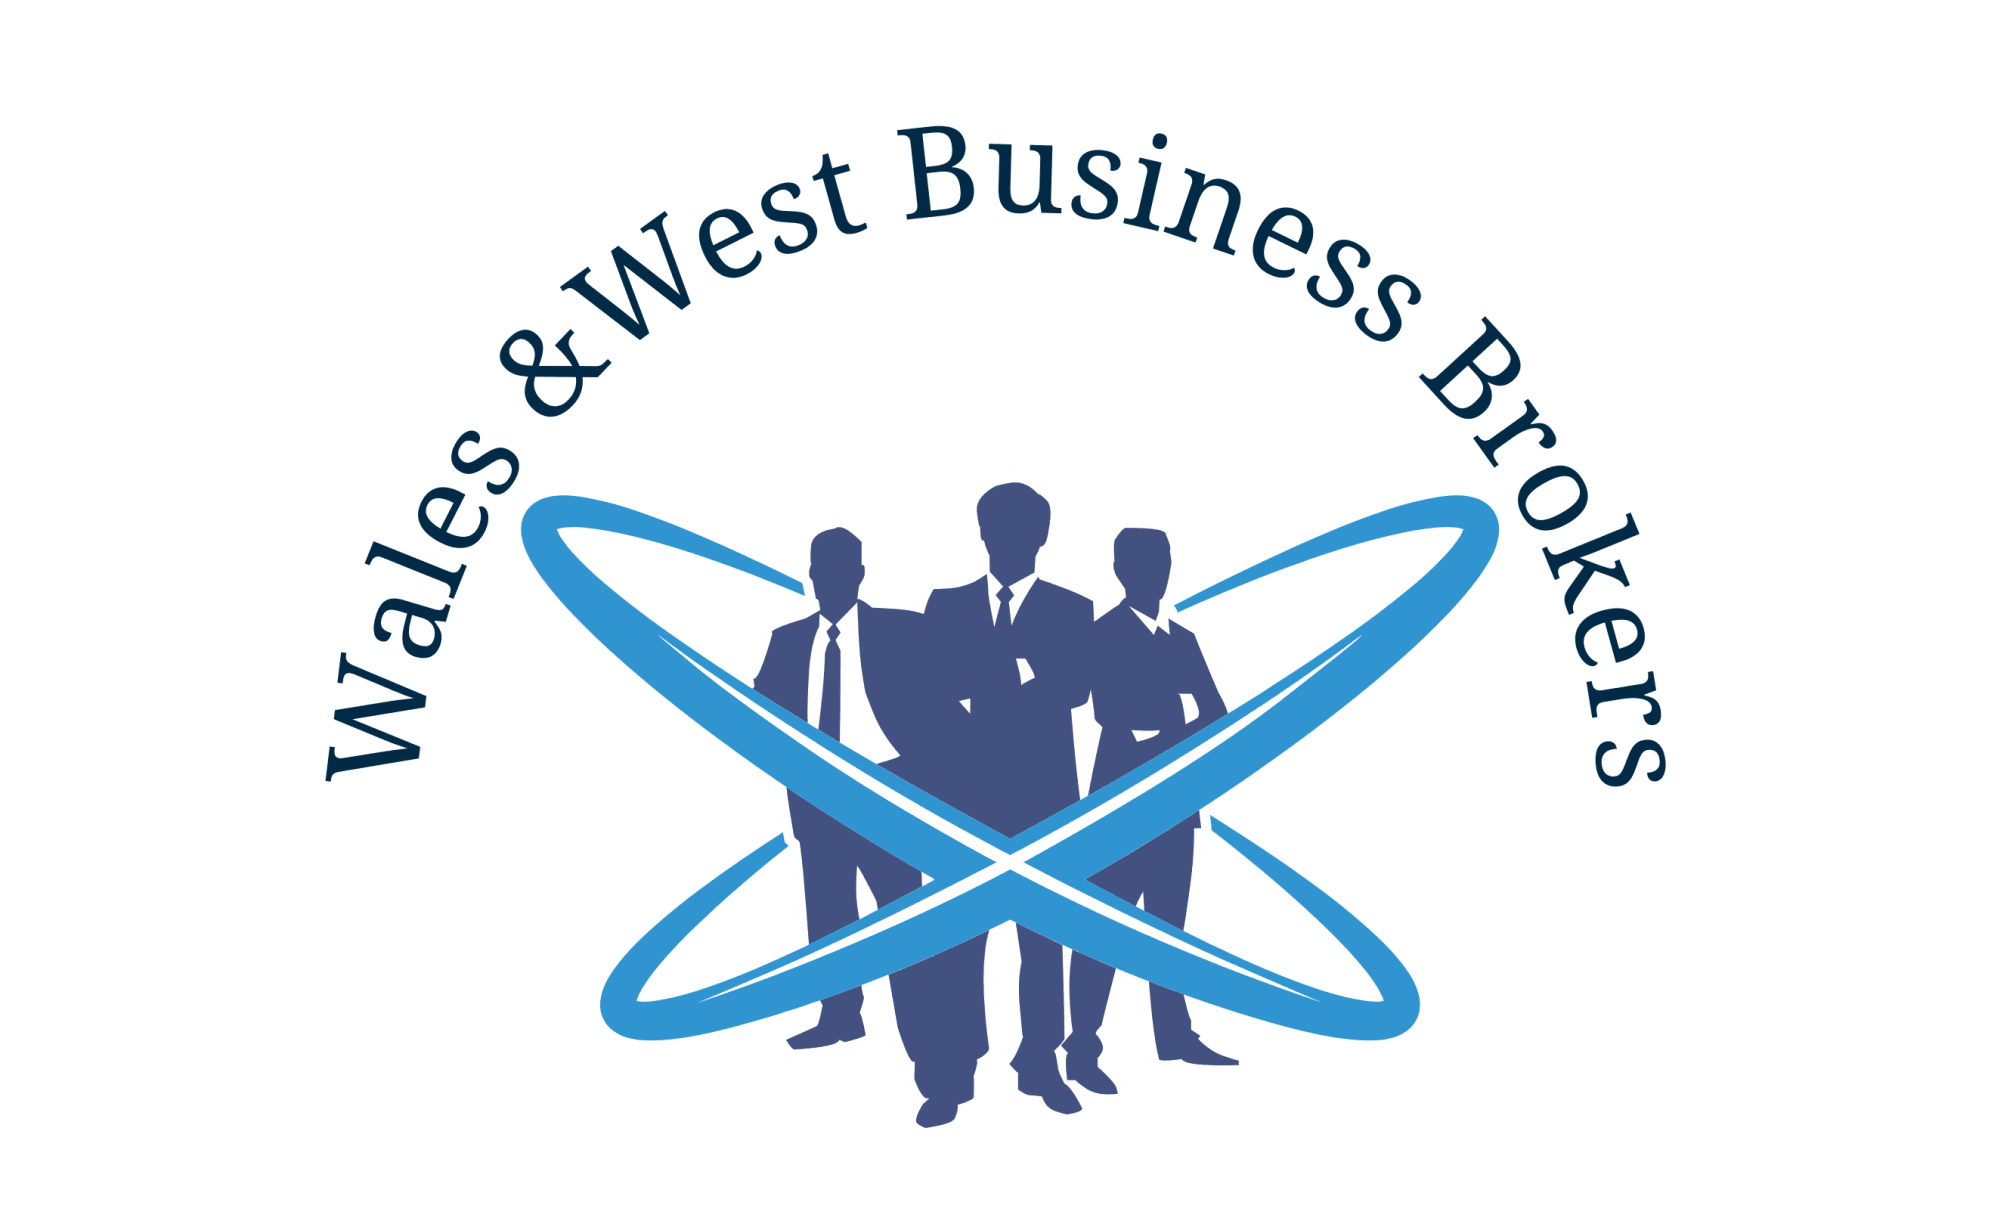 Images Wales & West Business Brokers